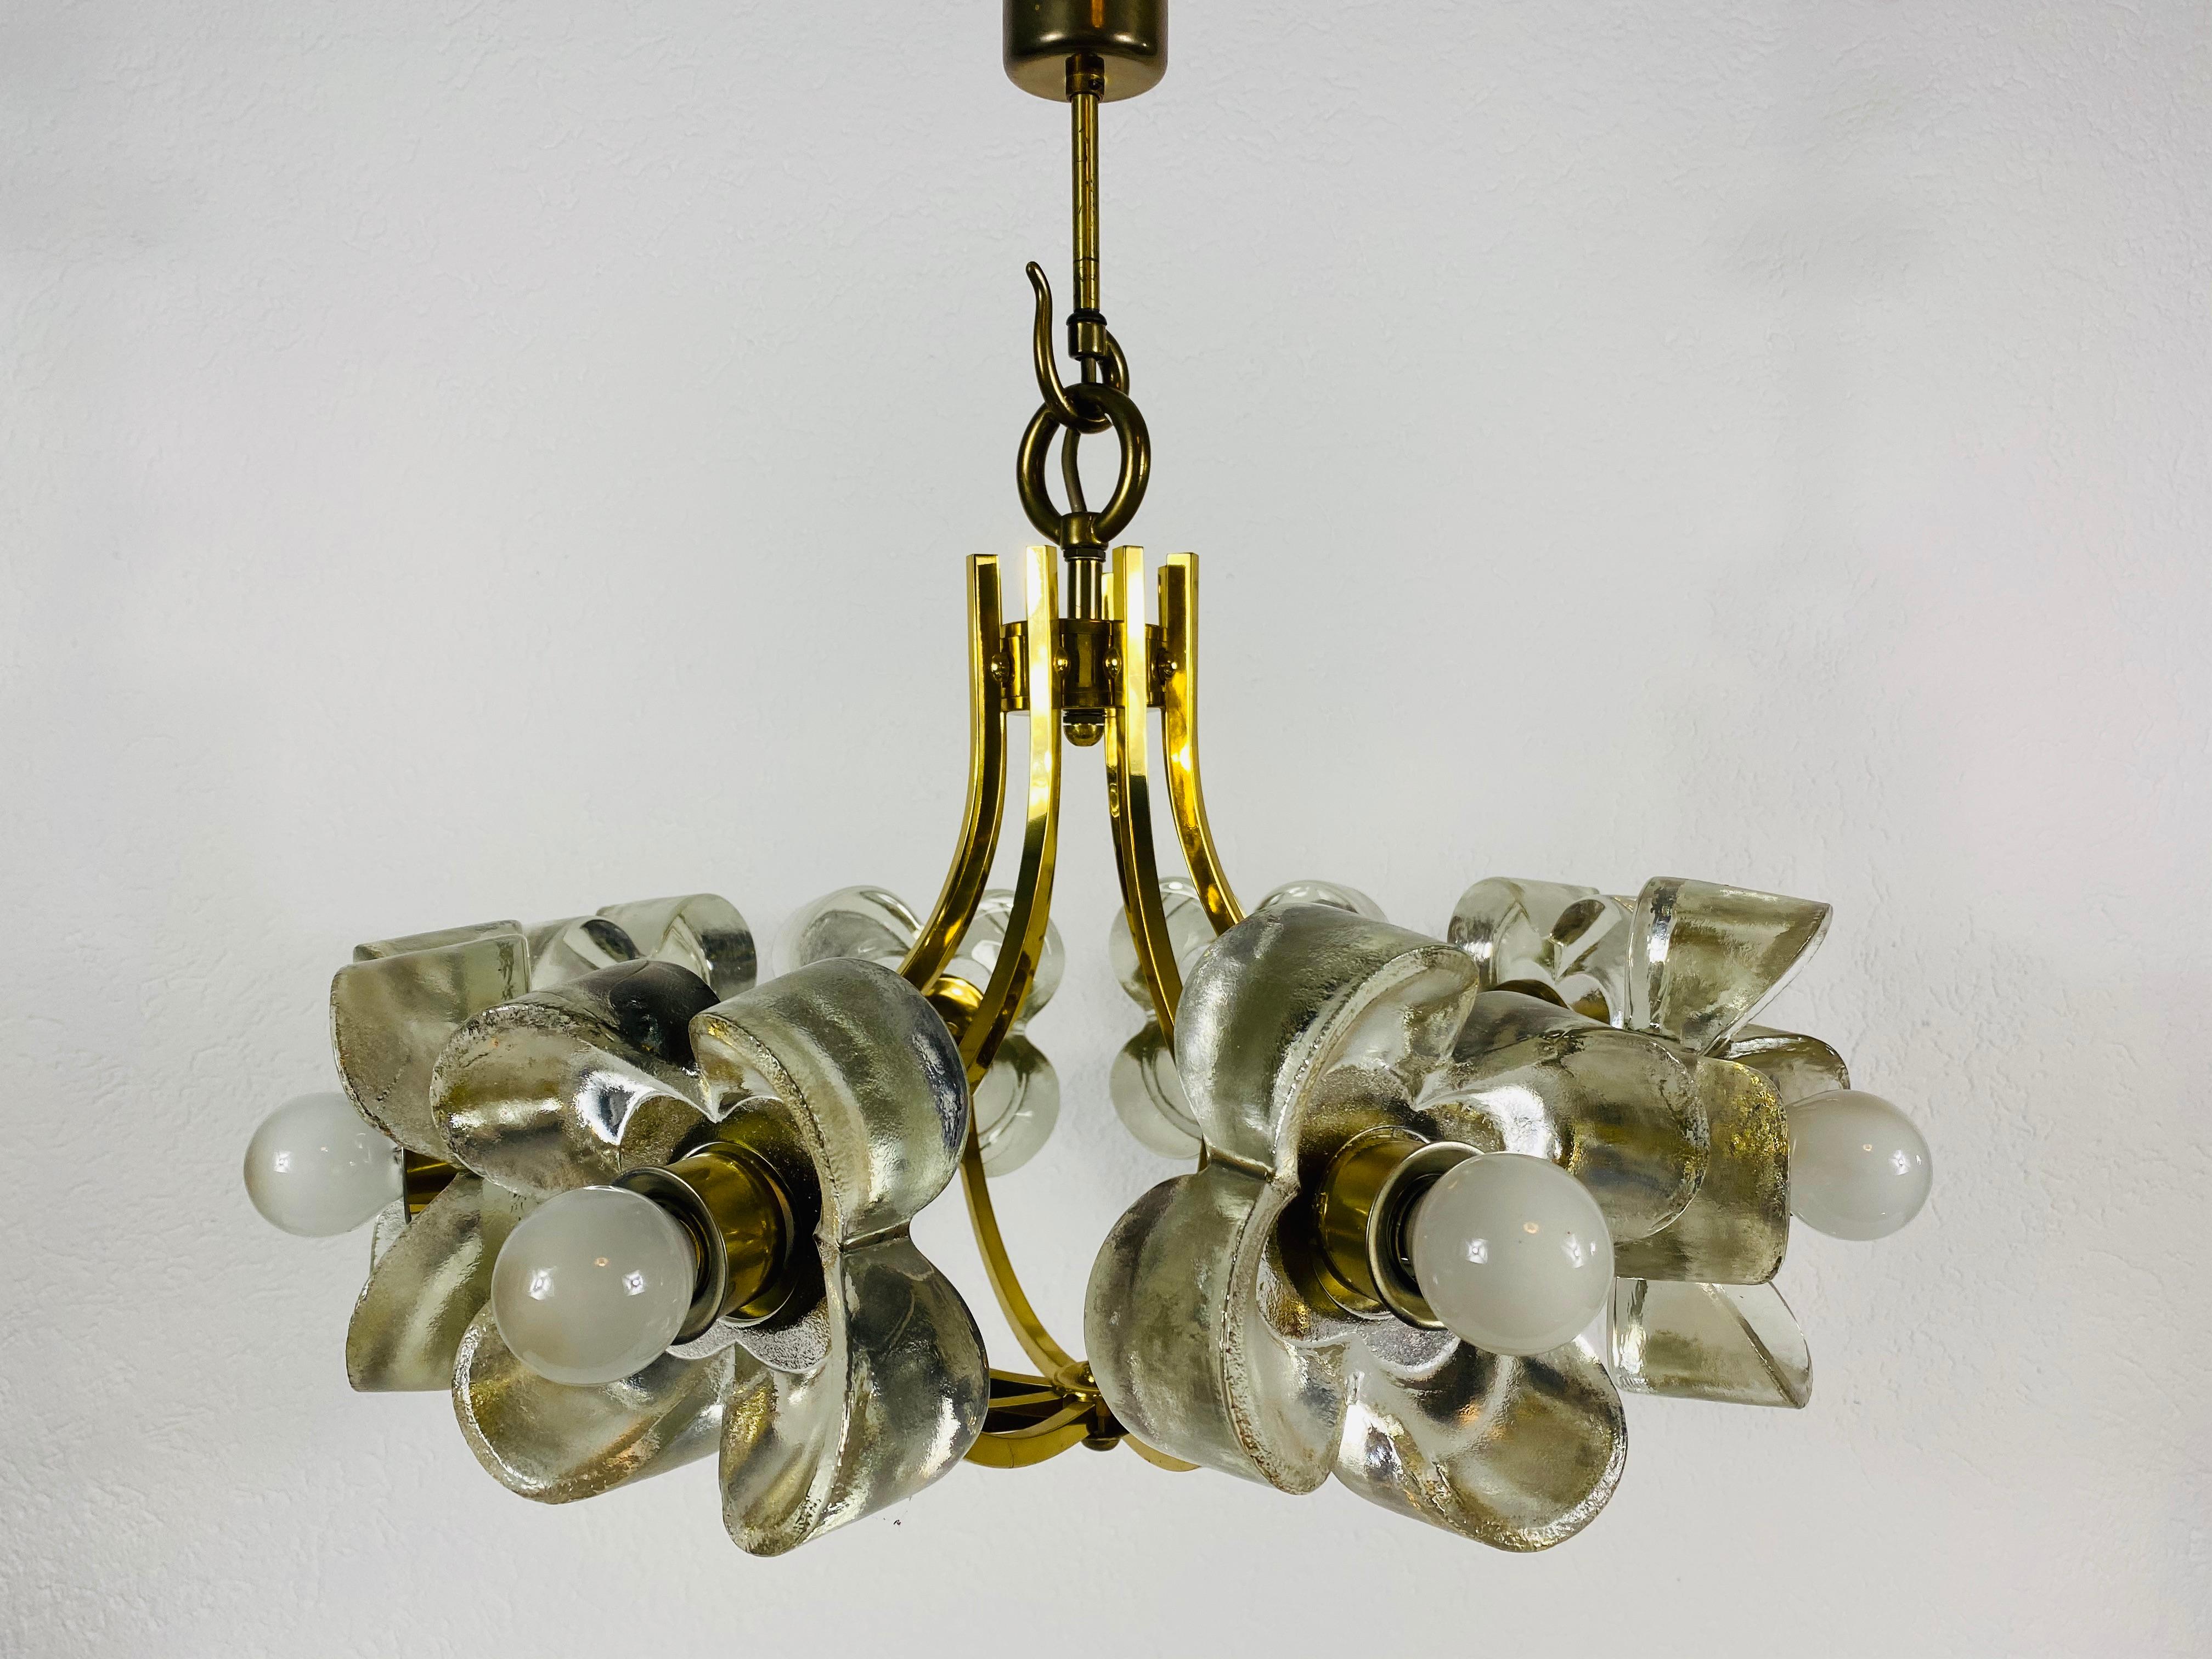 Italian Midcentury Glass and Brass 8-Arm Chandelier Mazzega Attributed, 1960s For Sale 1